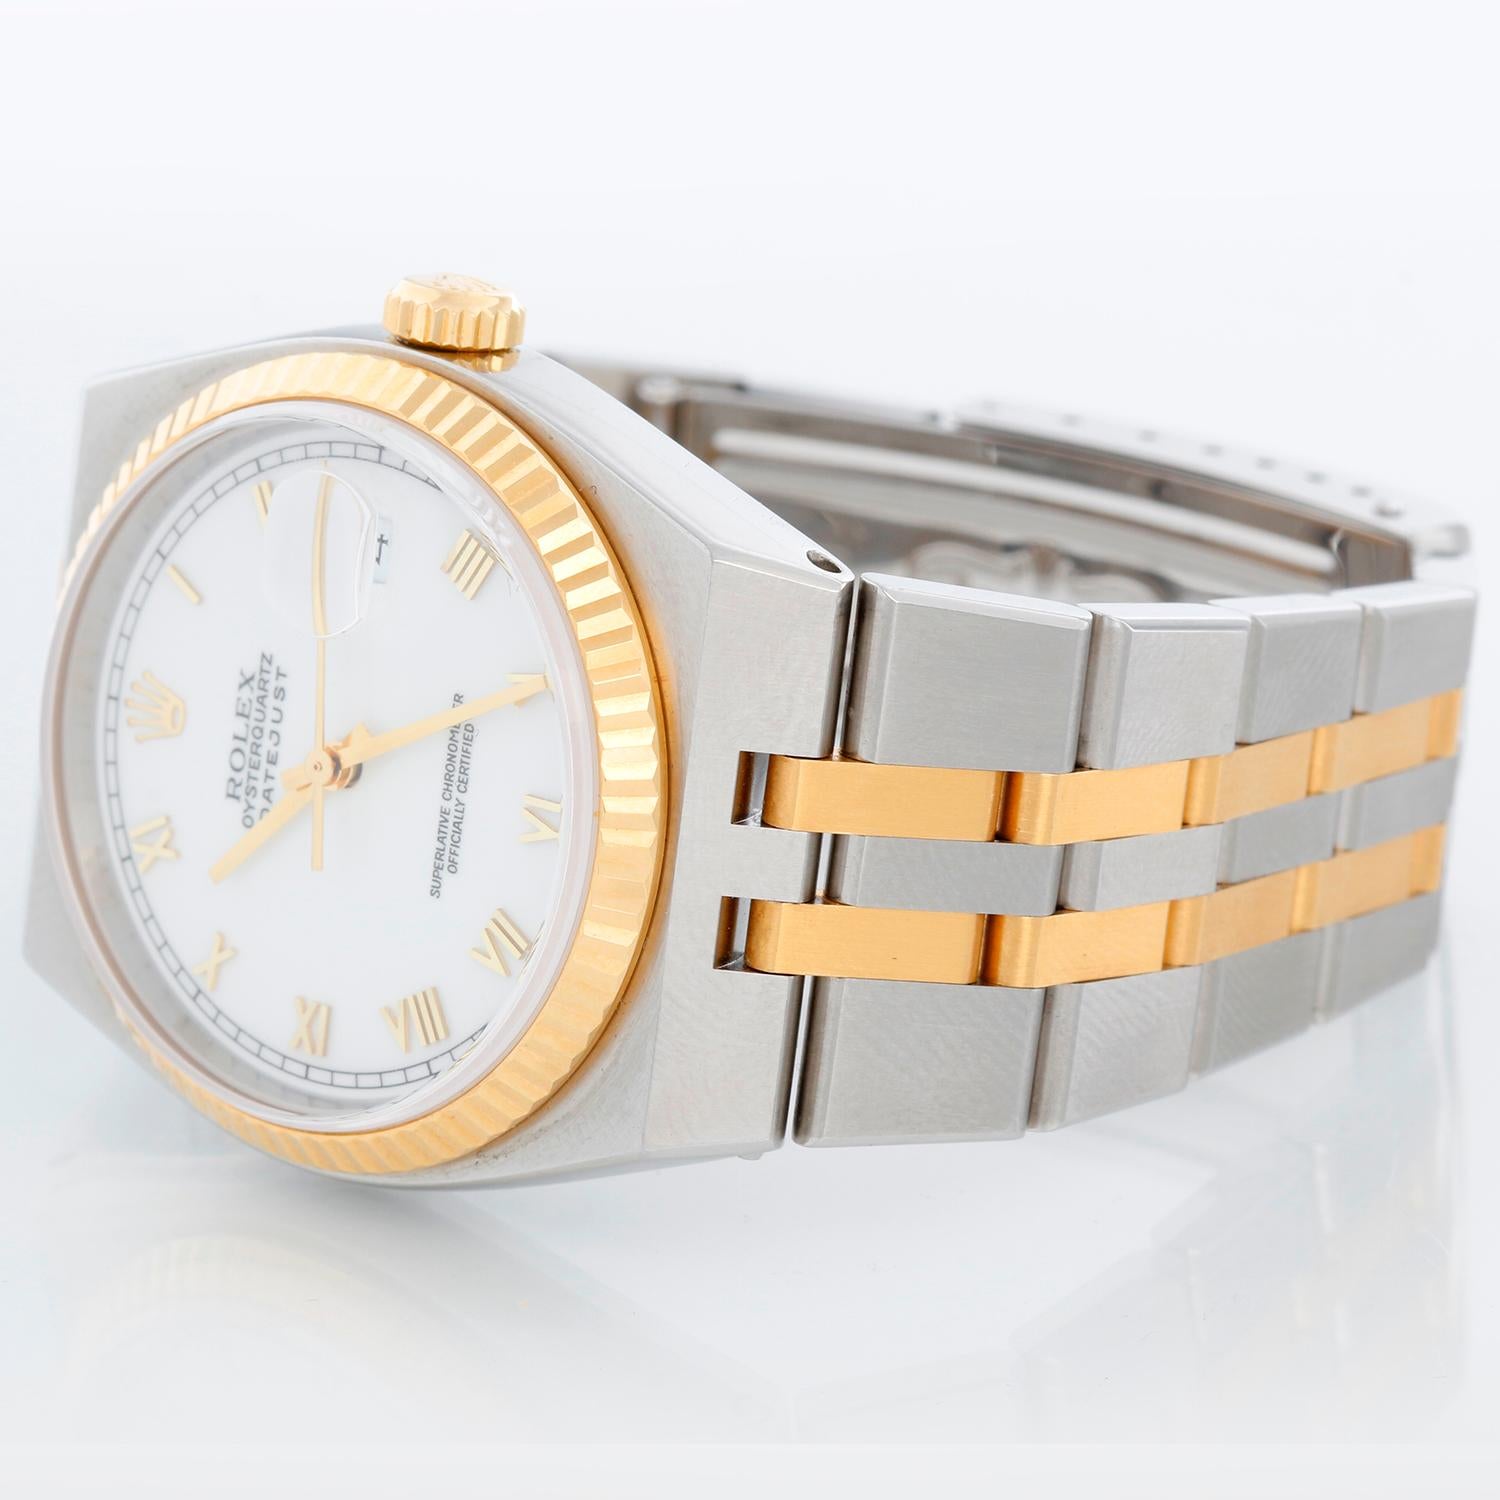 Rolex Oysterquartz Datejust 2-Tone Men's Watch 17013 - Quartz, Quickset date, sapphire crystal. Stainless steel case with yellow gold fluted bezel. White dial with raised gold Roman markers. Stainless steel and yellow gold Oyster bracelet; Fits a 7